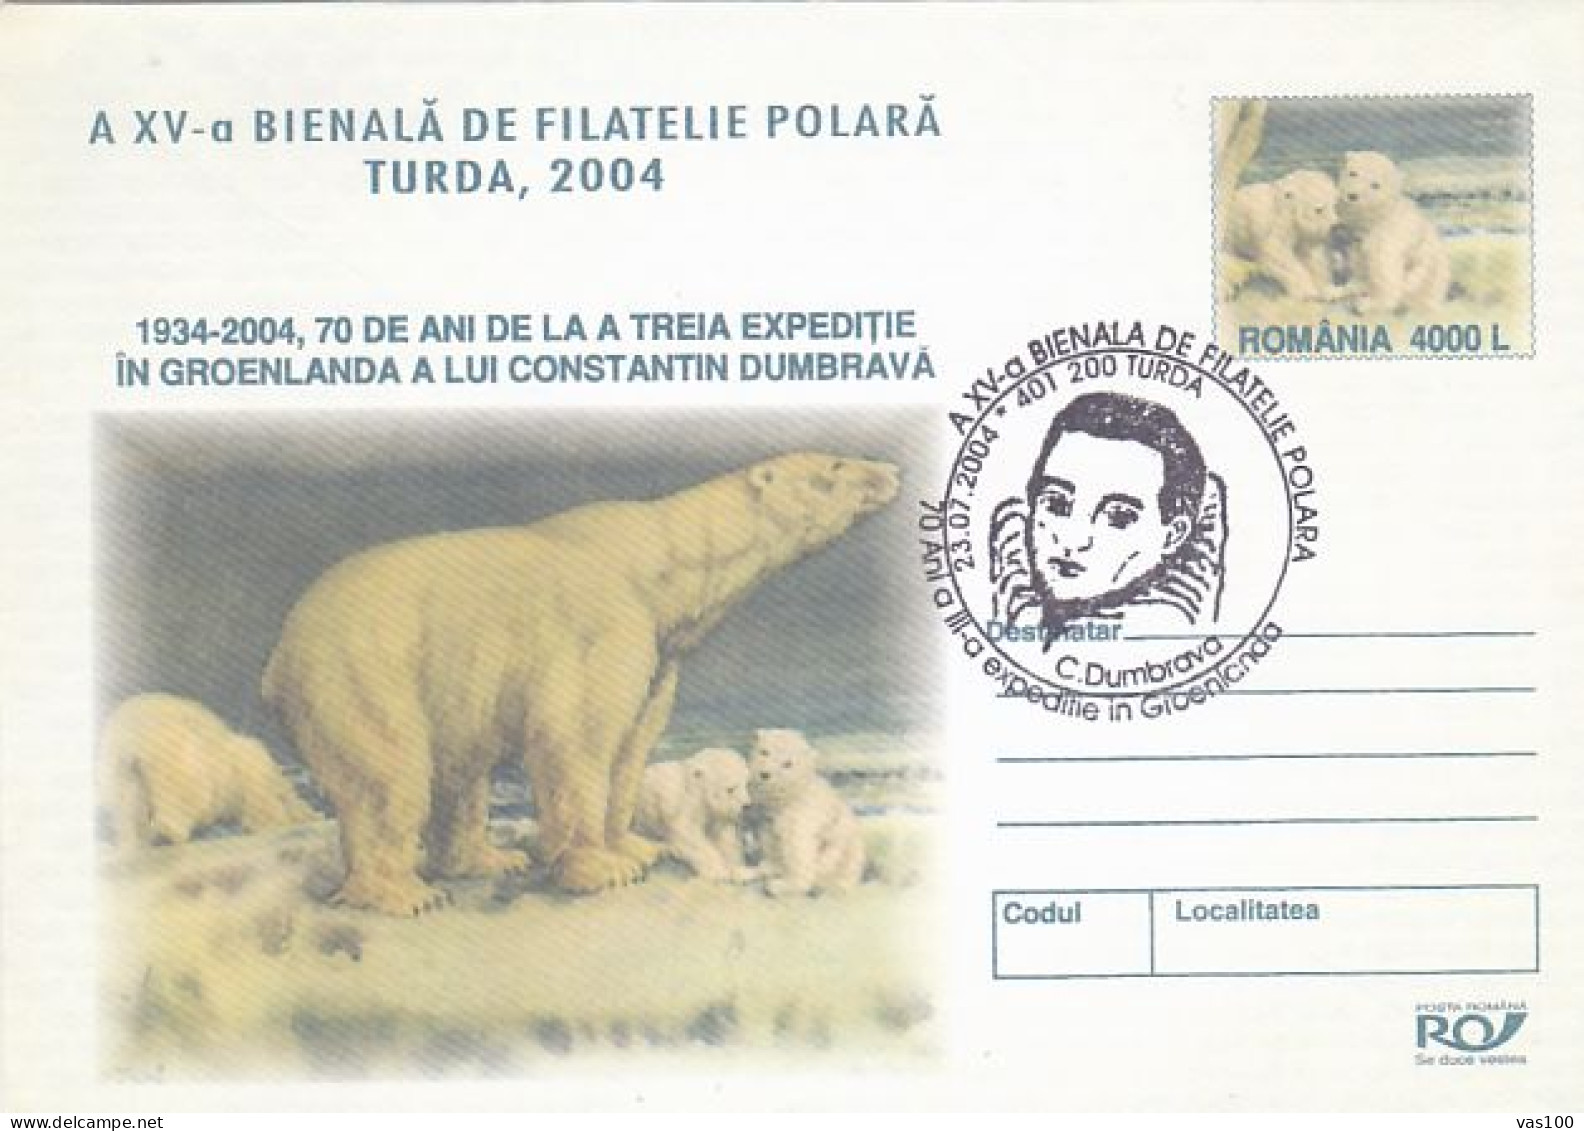 NORTH POLE, ARCTIC EXPEDITION, C. DUMBRAVA IN GREENLAND, POLAR BEAR, COVER STATIONERY, ENTIER POSTAL, 2004, ROMANIA - Arktis Expeditionen